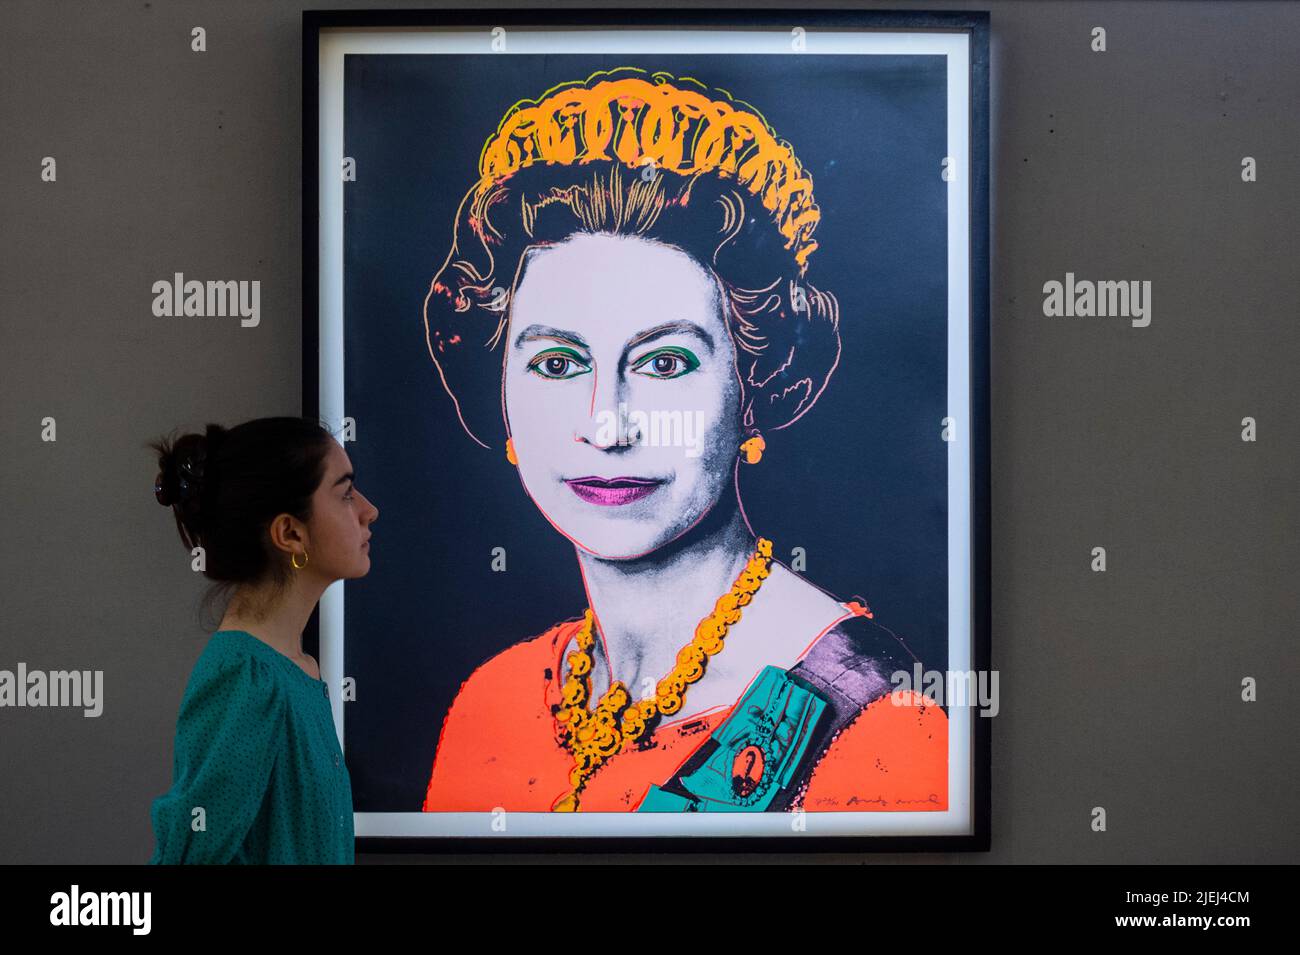 London, UK.  27 June 2022. A staff member views “Queen Elizabeth II”, 1985, from Reigning Queens, by Andy Warhol (Est. £120,000 - £180,000) at a preview of Bonhams’ Prints & Multiples sale.  The auction will take place on 29 June at Bonhams’ New Bond Street galleries.  Credit: Stephen Chung / Alamy Live News Stock Photo